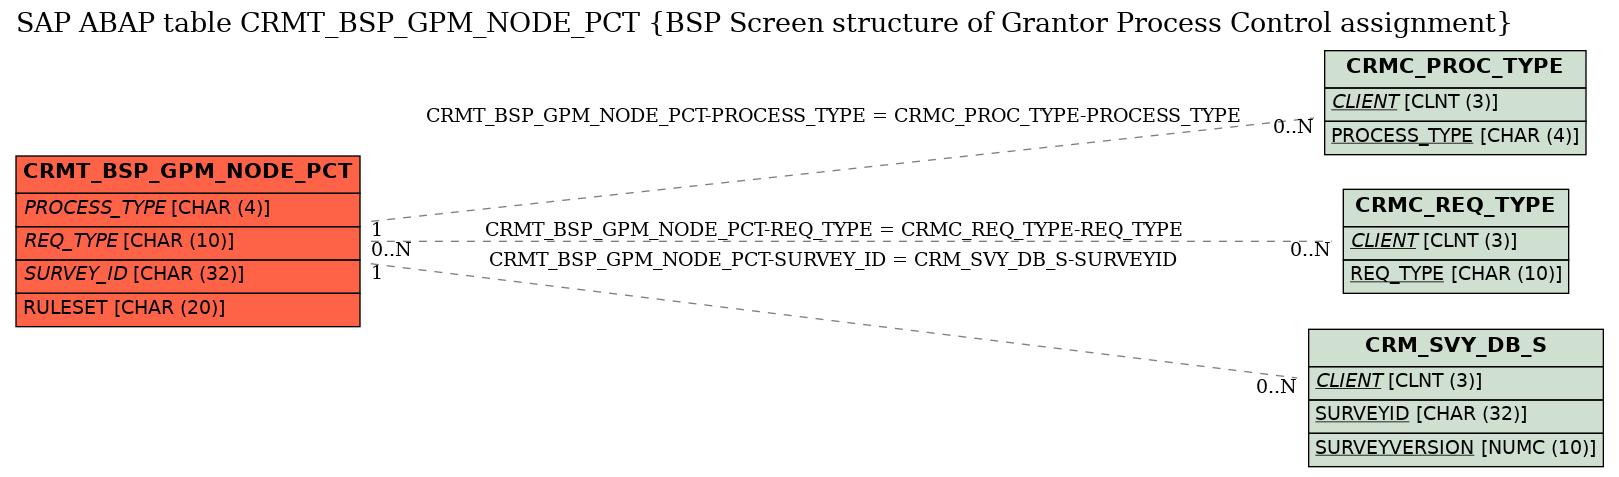 E-R Diagram for table CRMT_BSP_GPM_NODE_PCT (BSP Screen structure of Grantor Process Control assignment)